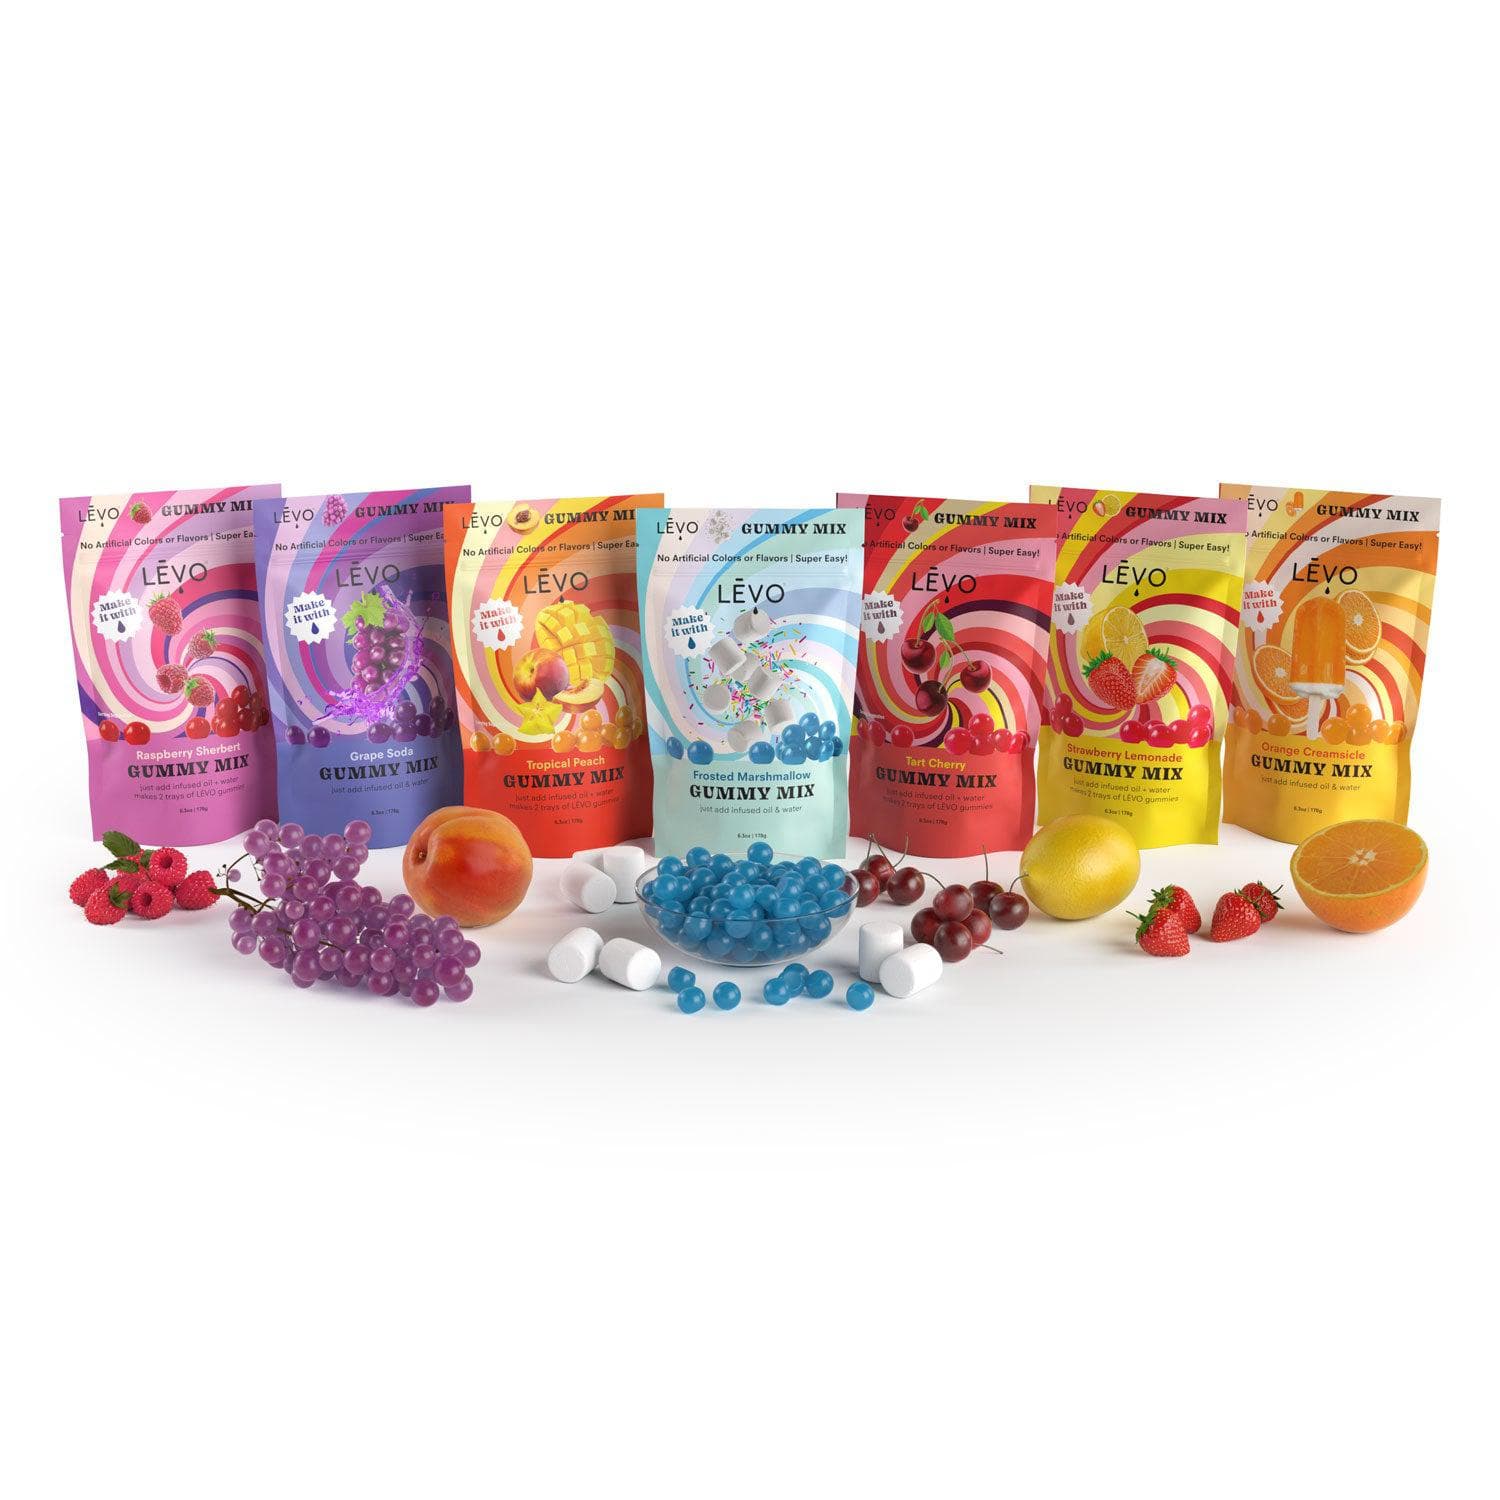 All 7 flavor options - 4 will come in this bundle. Elevate your gummy-making game with the Gummy Edibles Making Kit and Gummy Candy Mixer.